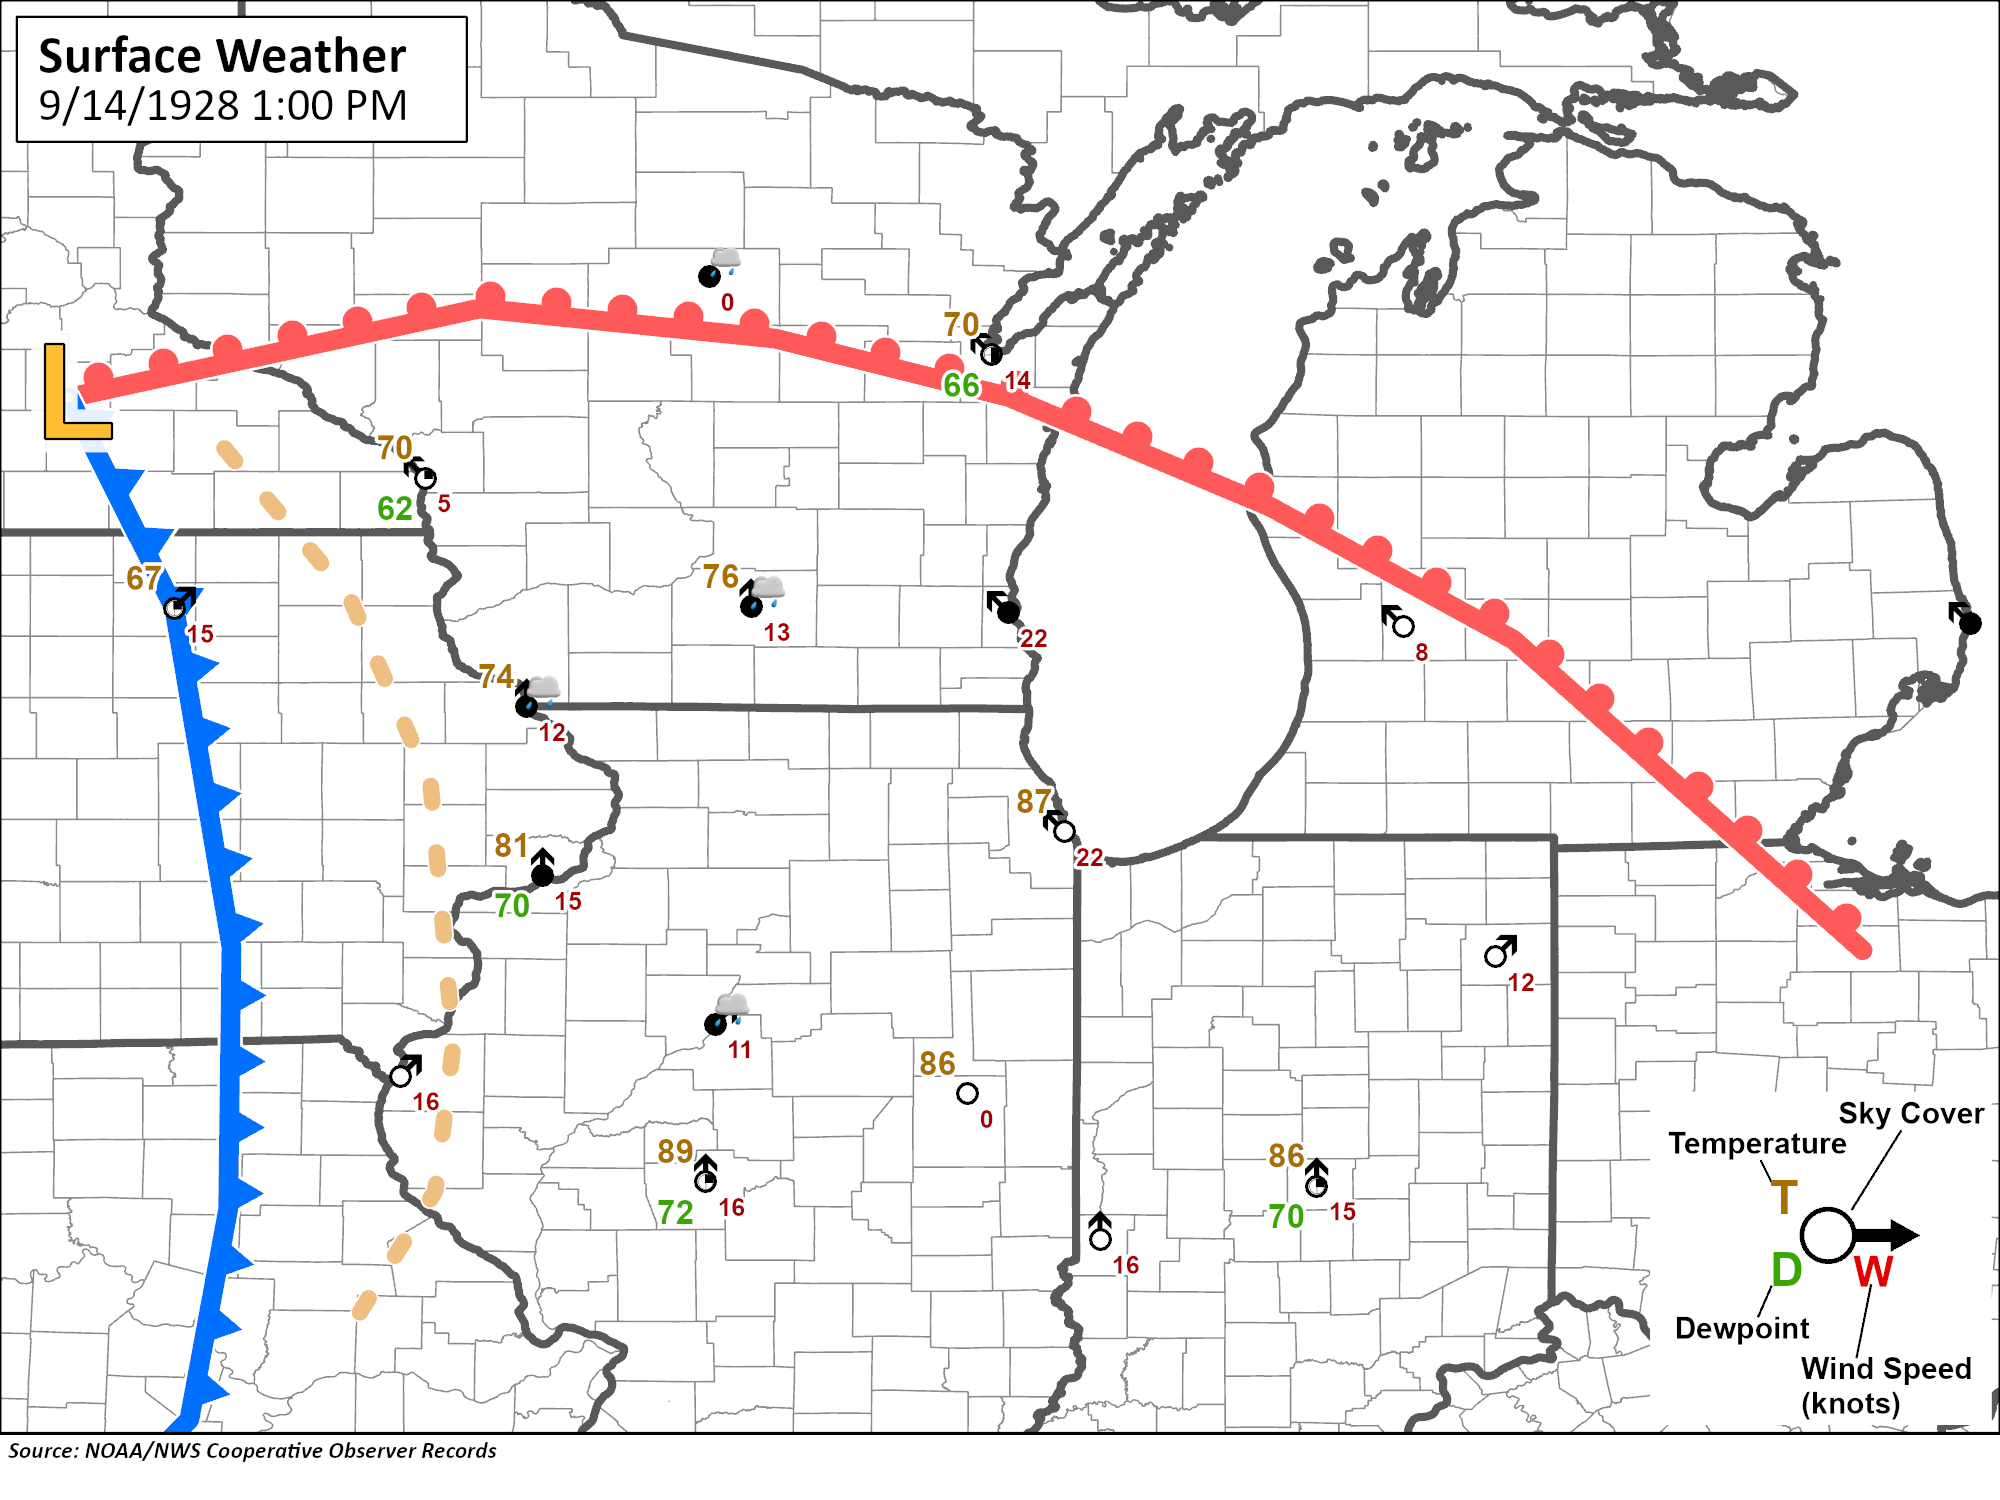 Map showing surface weather features on September 14, 1928 in the Midwest United States. A low pressure area is located in southern Minnesota with a warm front depicted east into southern Michigan and a cold front depicted south through Iowa and Missouri.